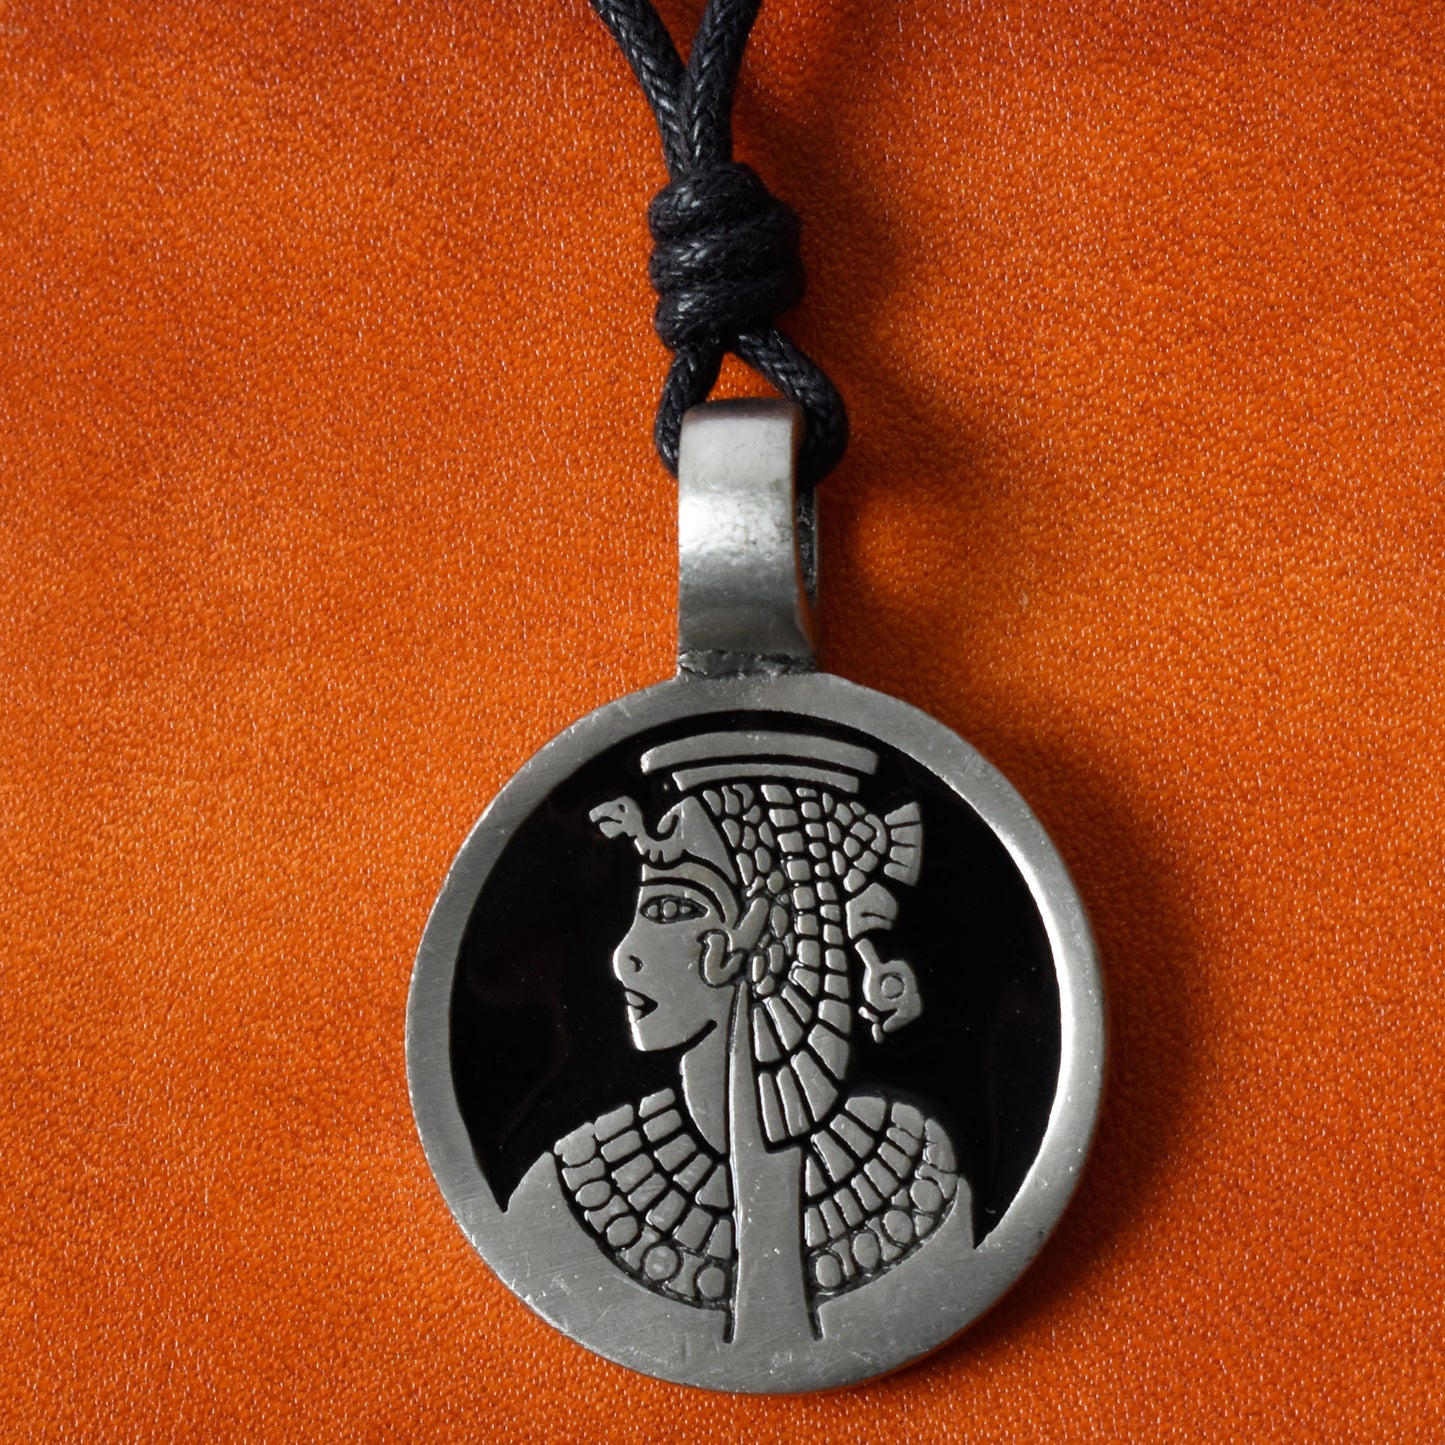 New Nefertari Egyptian Queen Silver Pewter Charm Necklace Pendant Jewelry